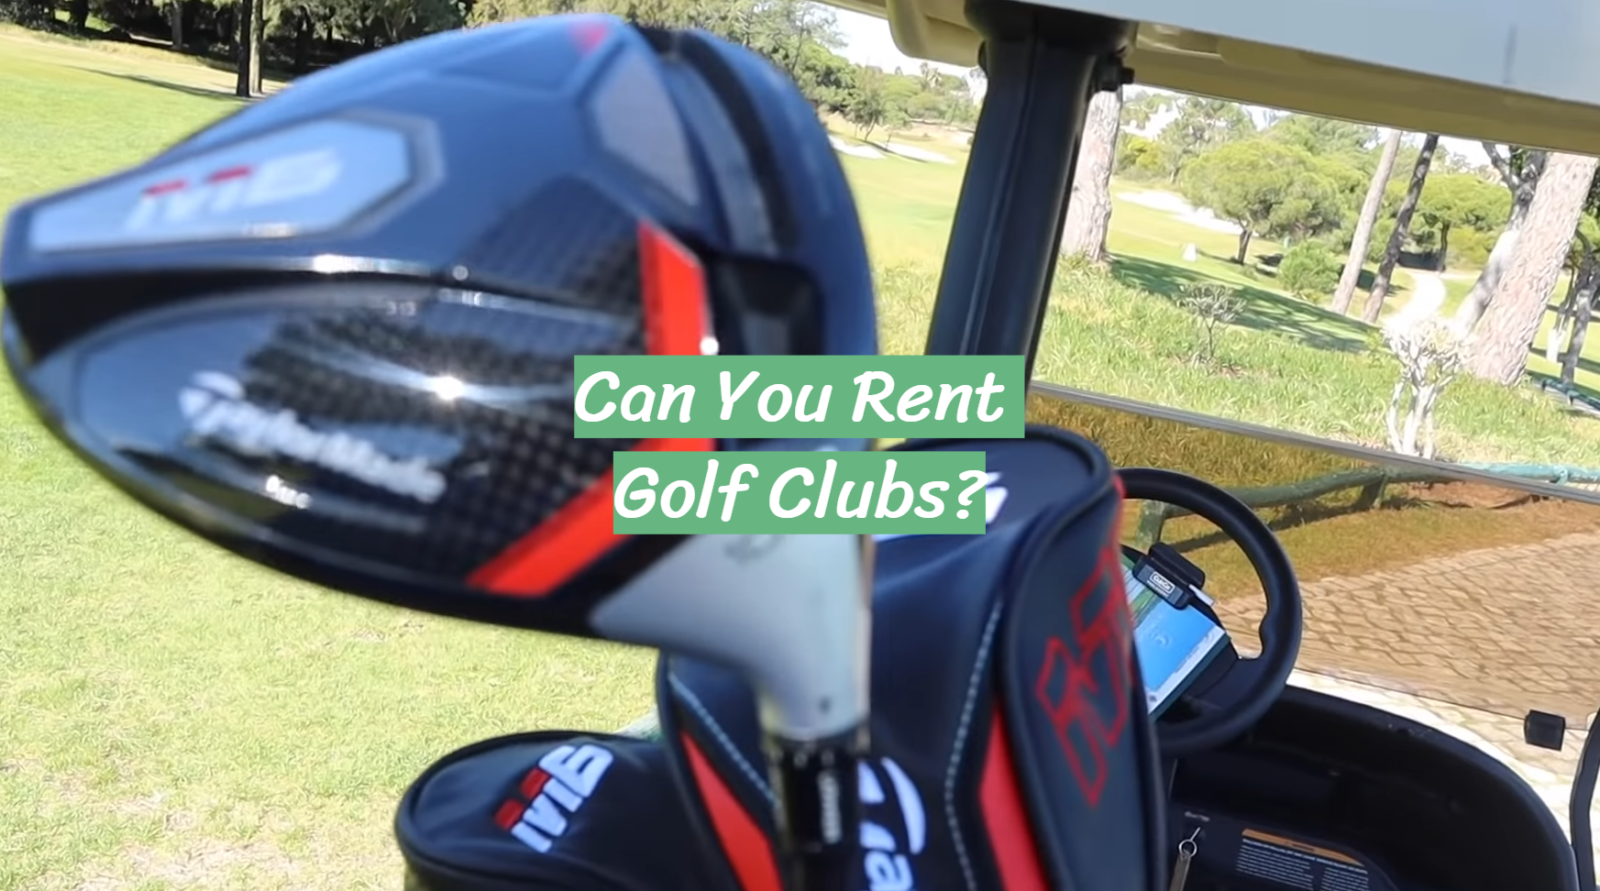 Can You Rent Golf Clubs?